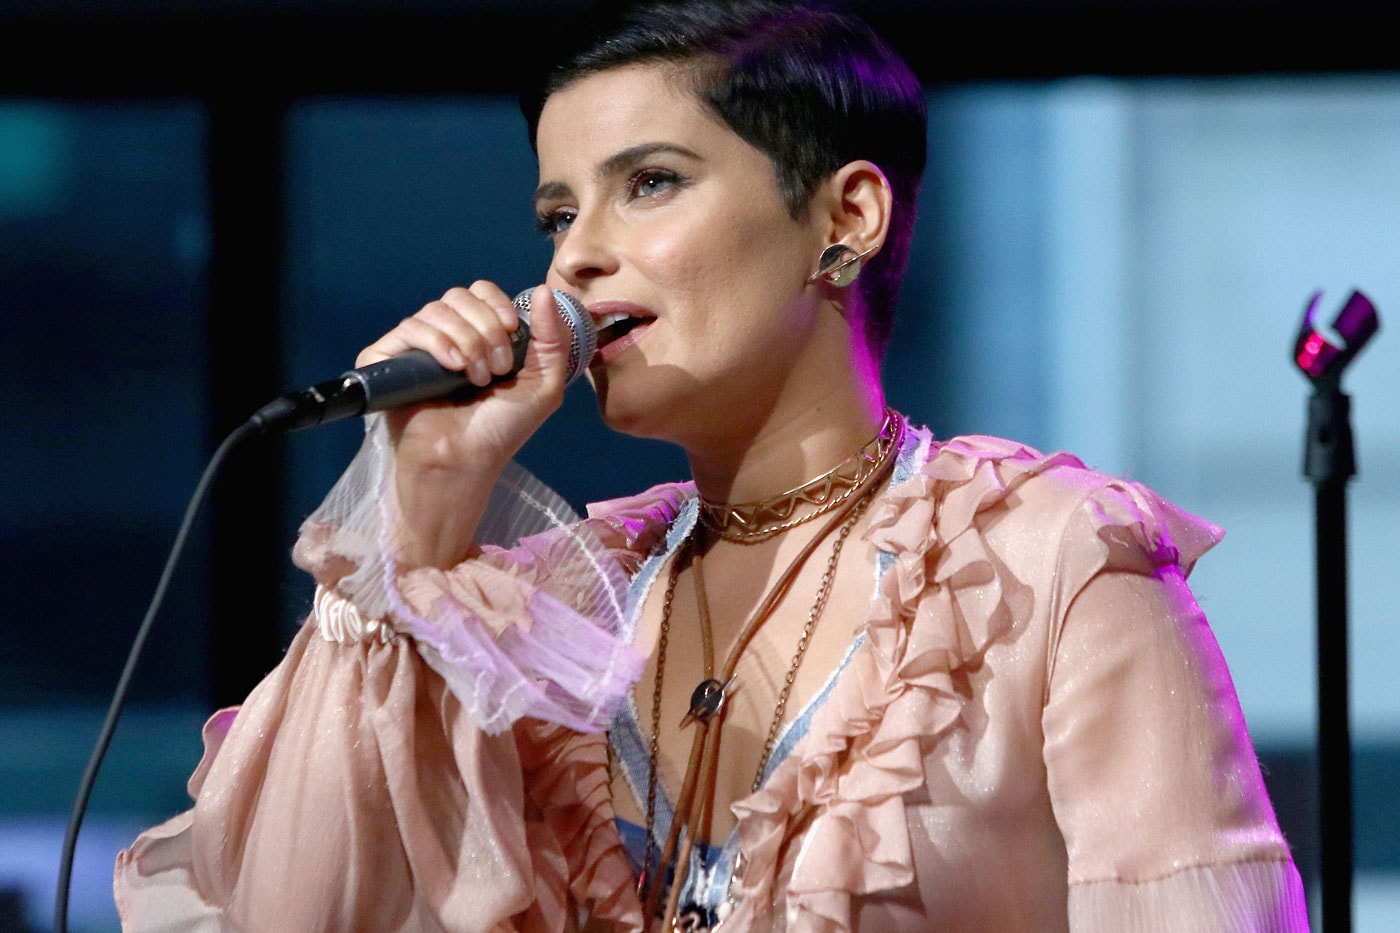 Nelly Furtado featuring Wiley – Night Is Young 